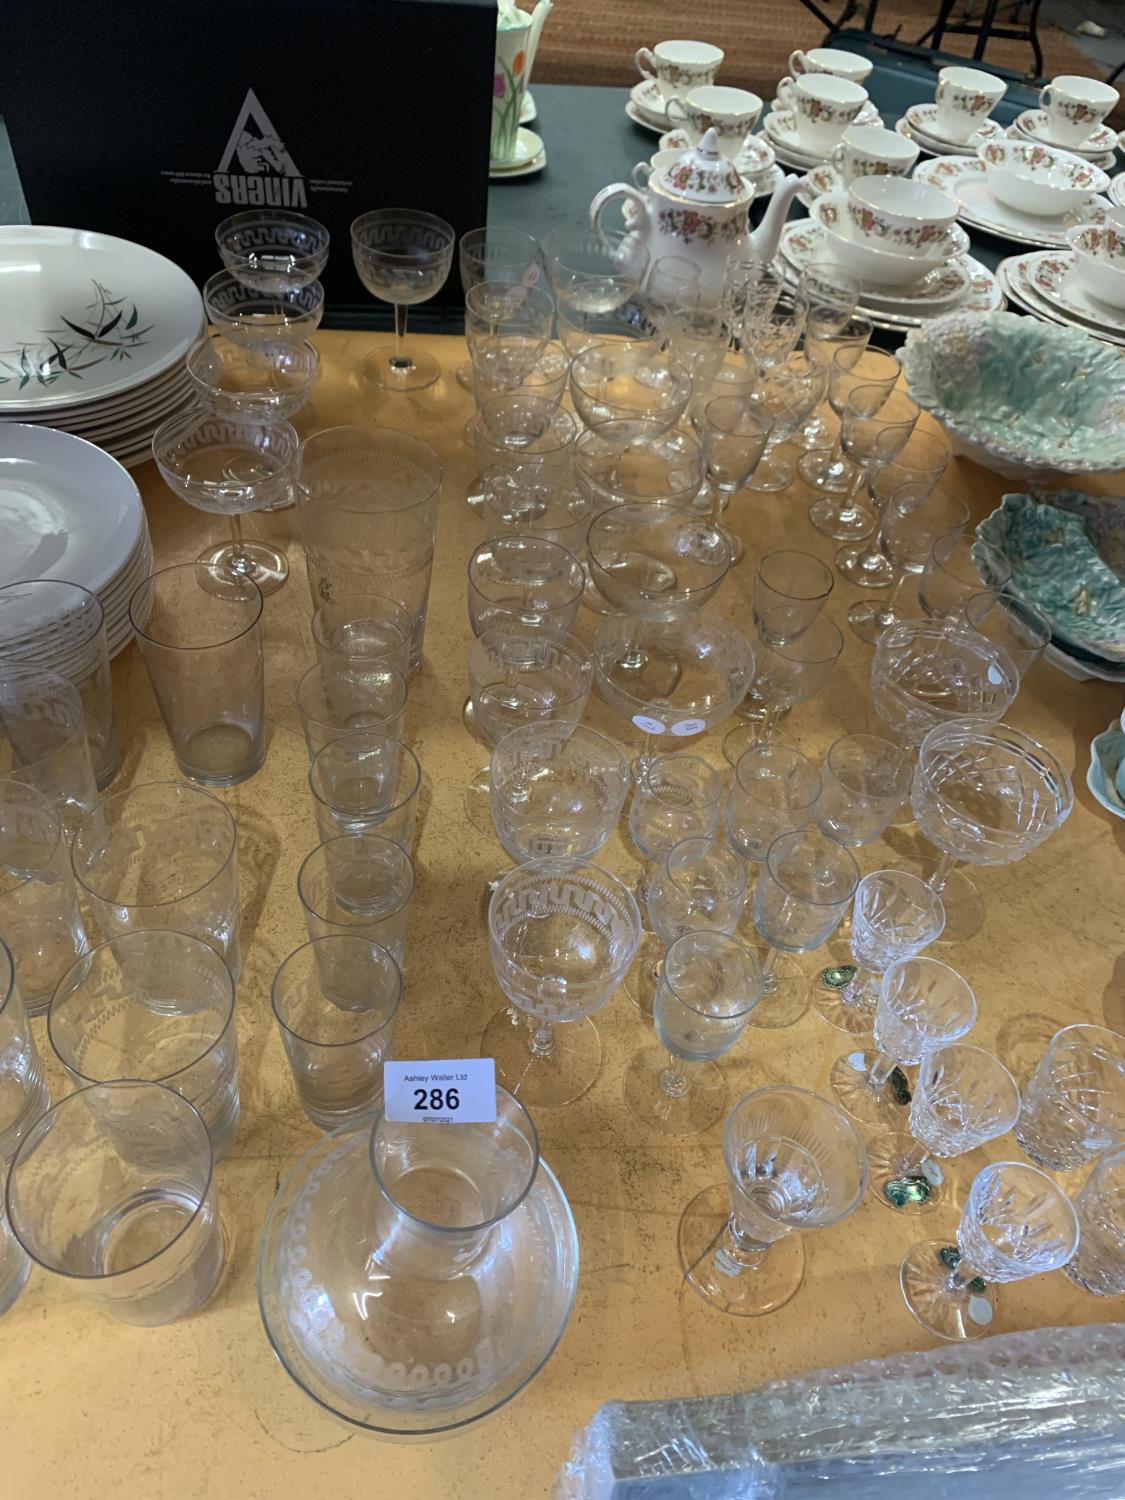 A LARGE QUANTITY OF VARIOUS GLASSWARE TO INCLUDE WINE, BRANDY, VASES ETC